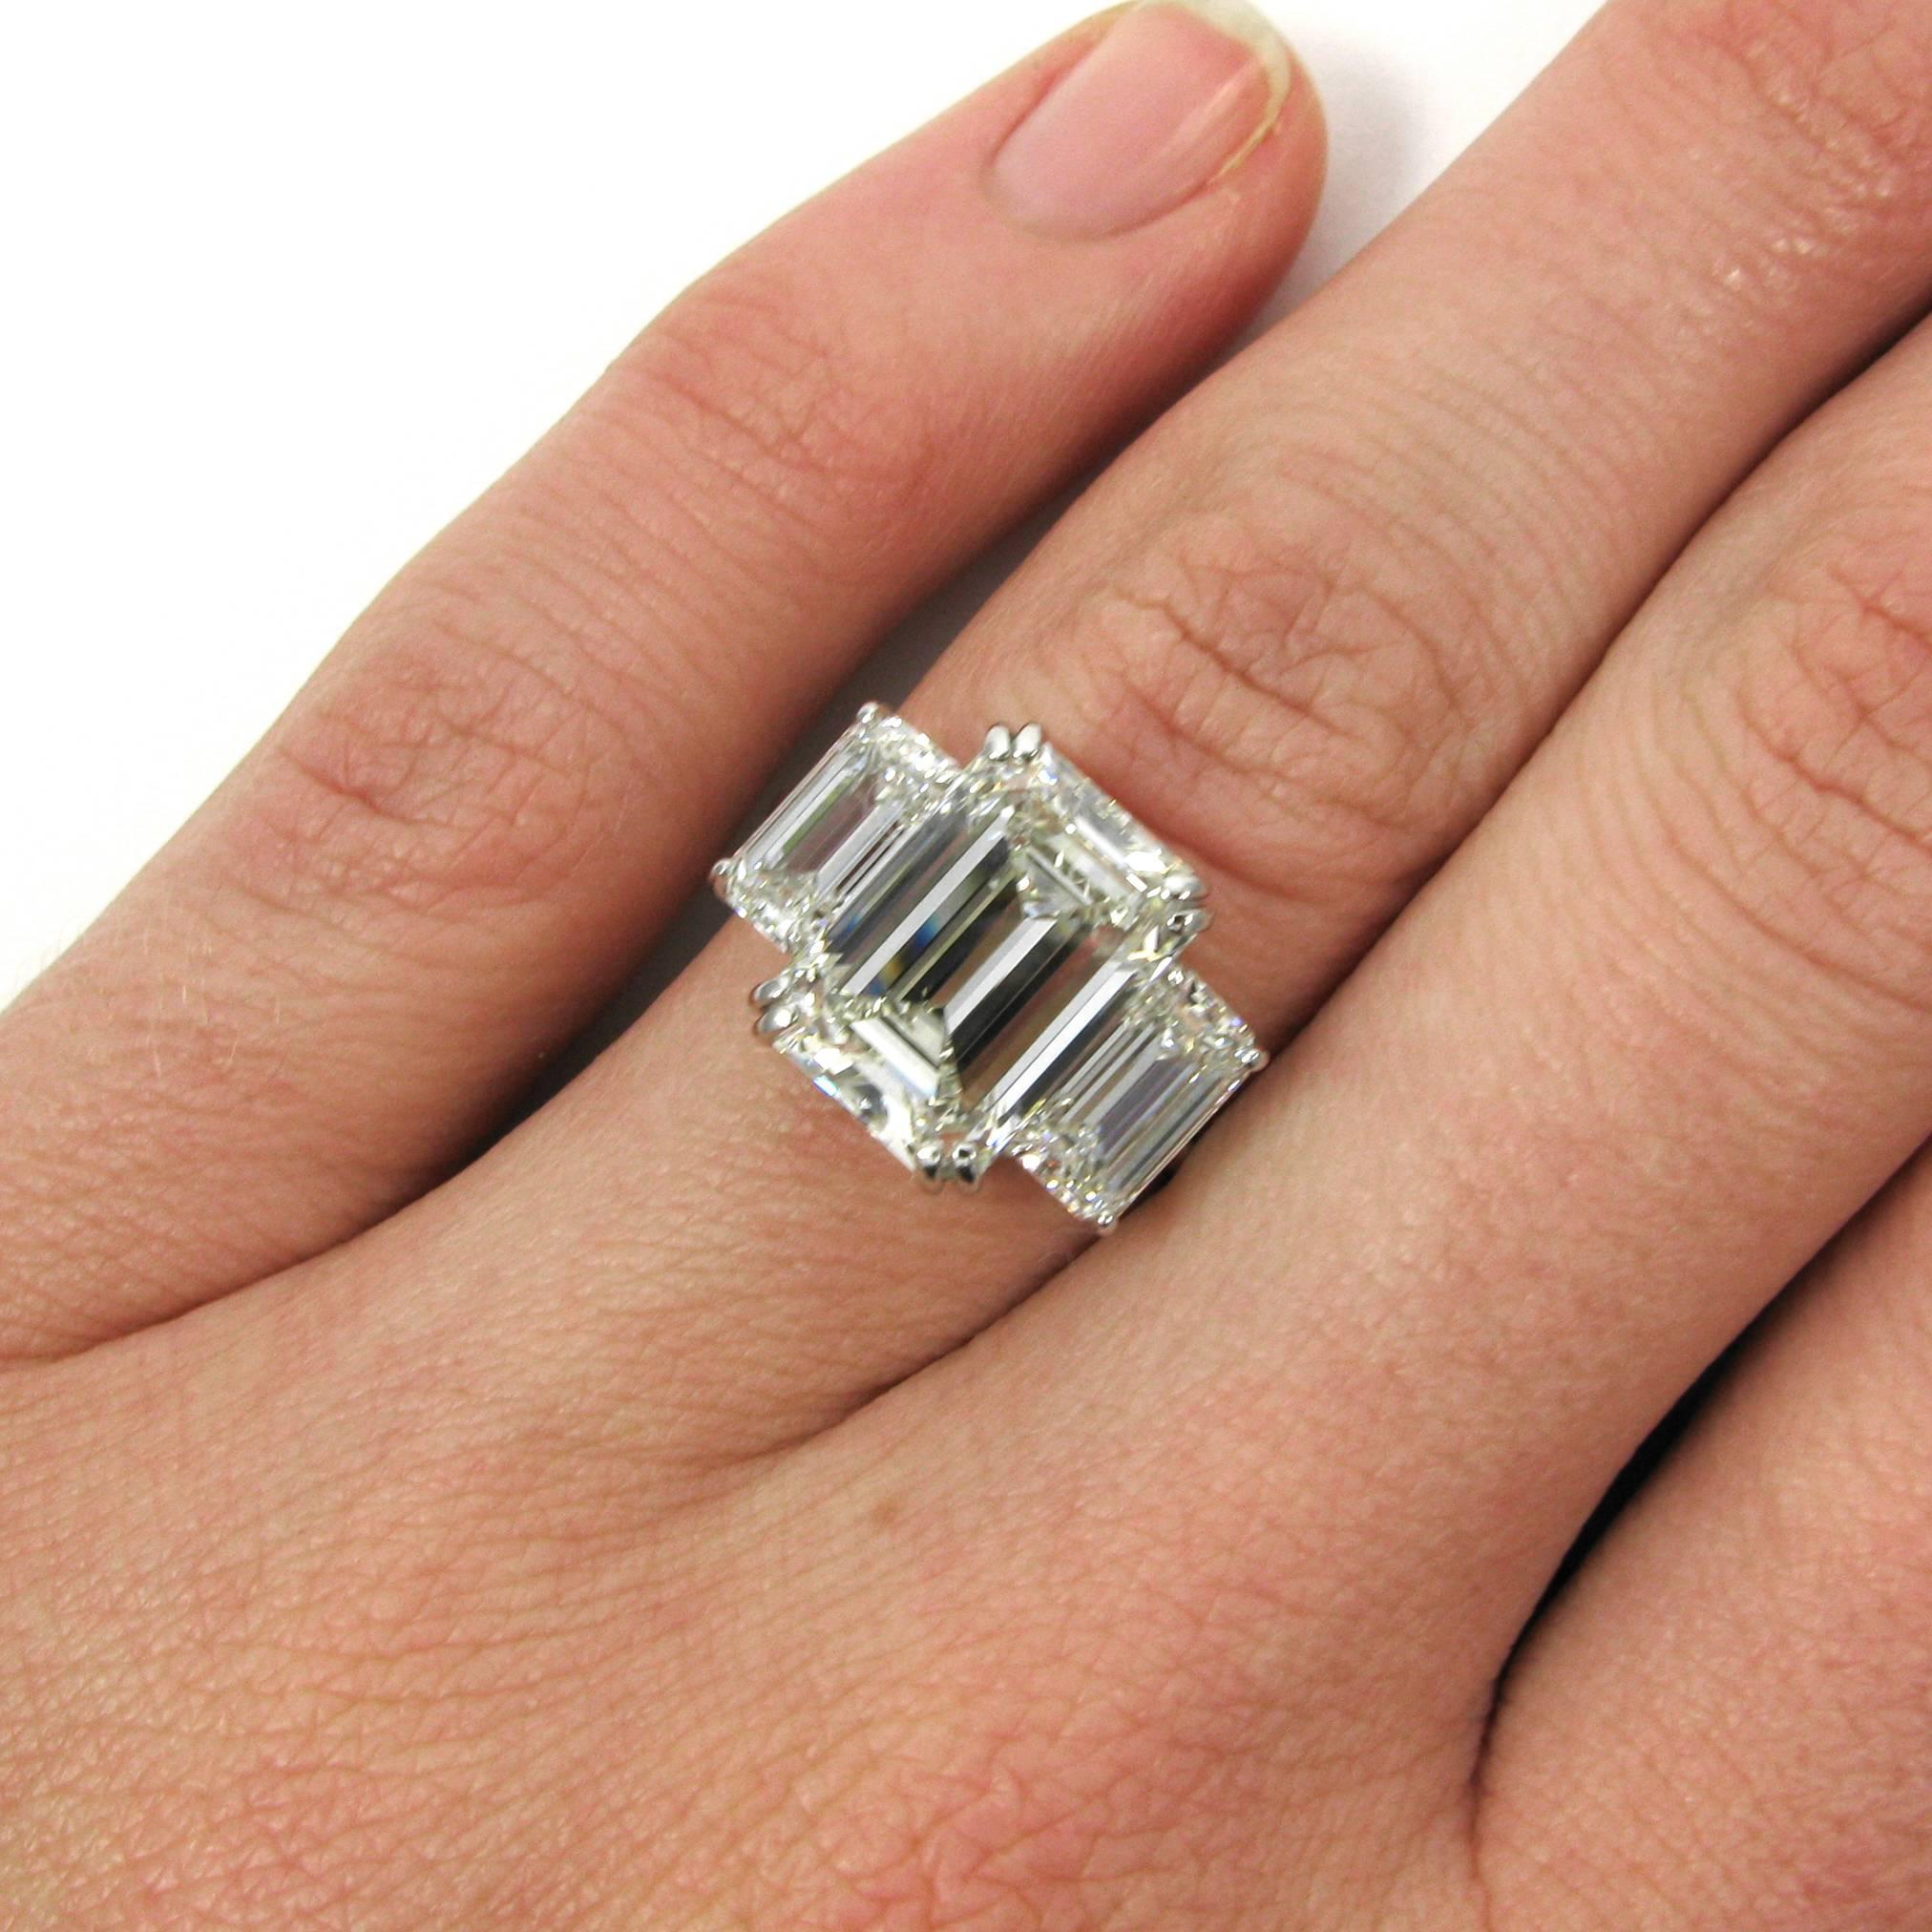 An elegant 5.01 carat emerald-cut diamond with J color and VVS1 clarity is featured in this platinum three stone ring. The 5.01 is flanked by a matched pair of emerald-cut diamonds totaling 2.07 carats, both with I color and VS1 clarity. 

Purchase